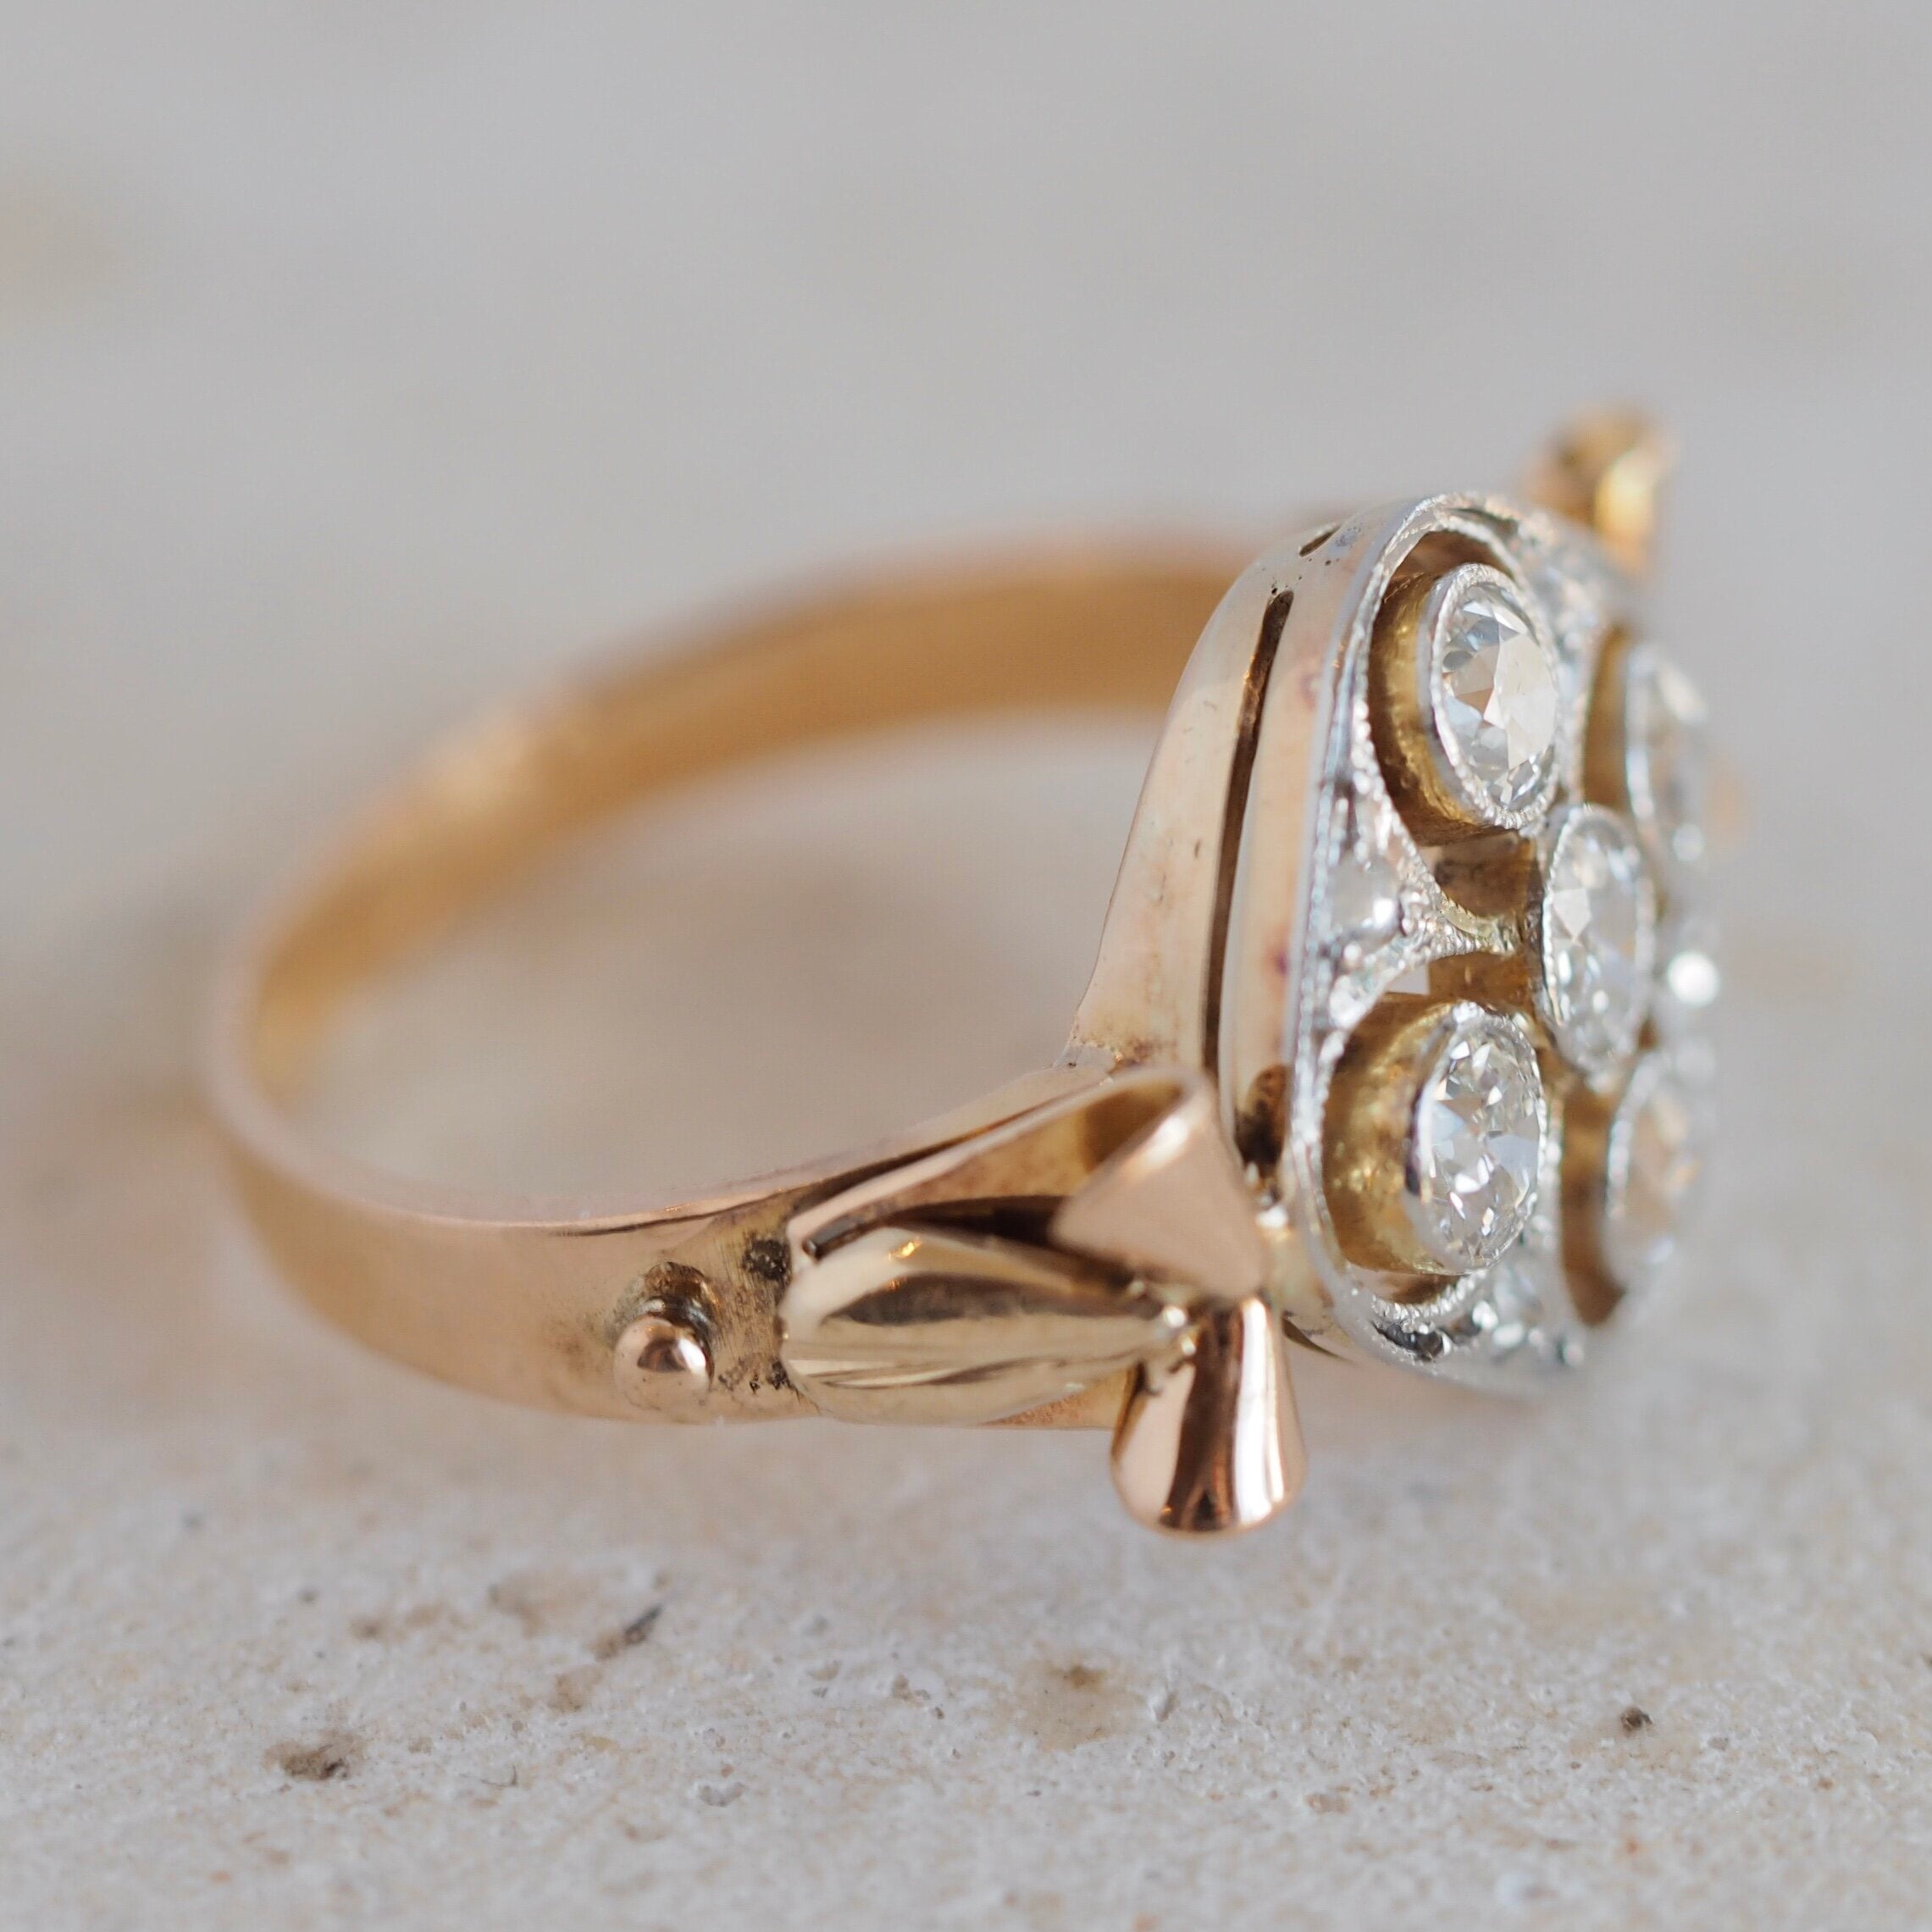 Vintage 18k Gold and Platinum Old European Cut, Old Mine Cut and Rose Cut Diamond Ring